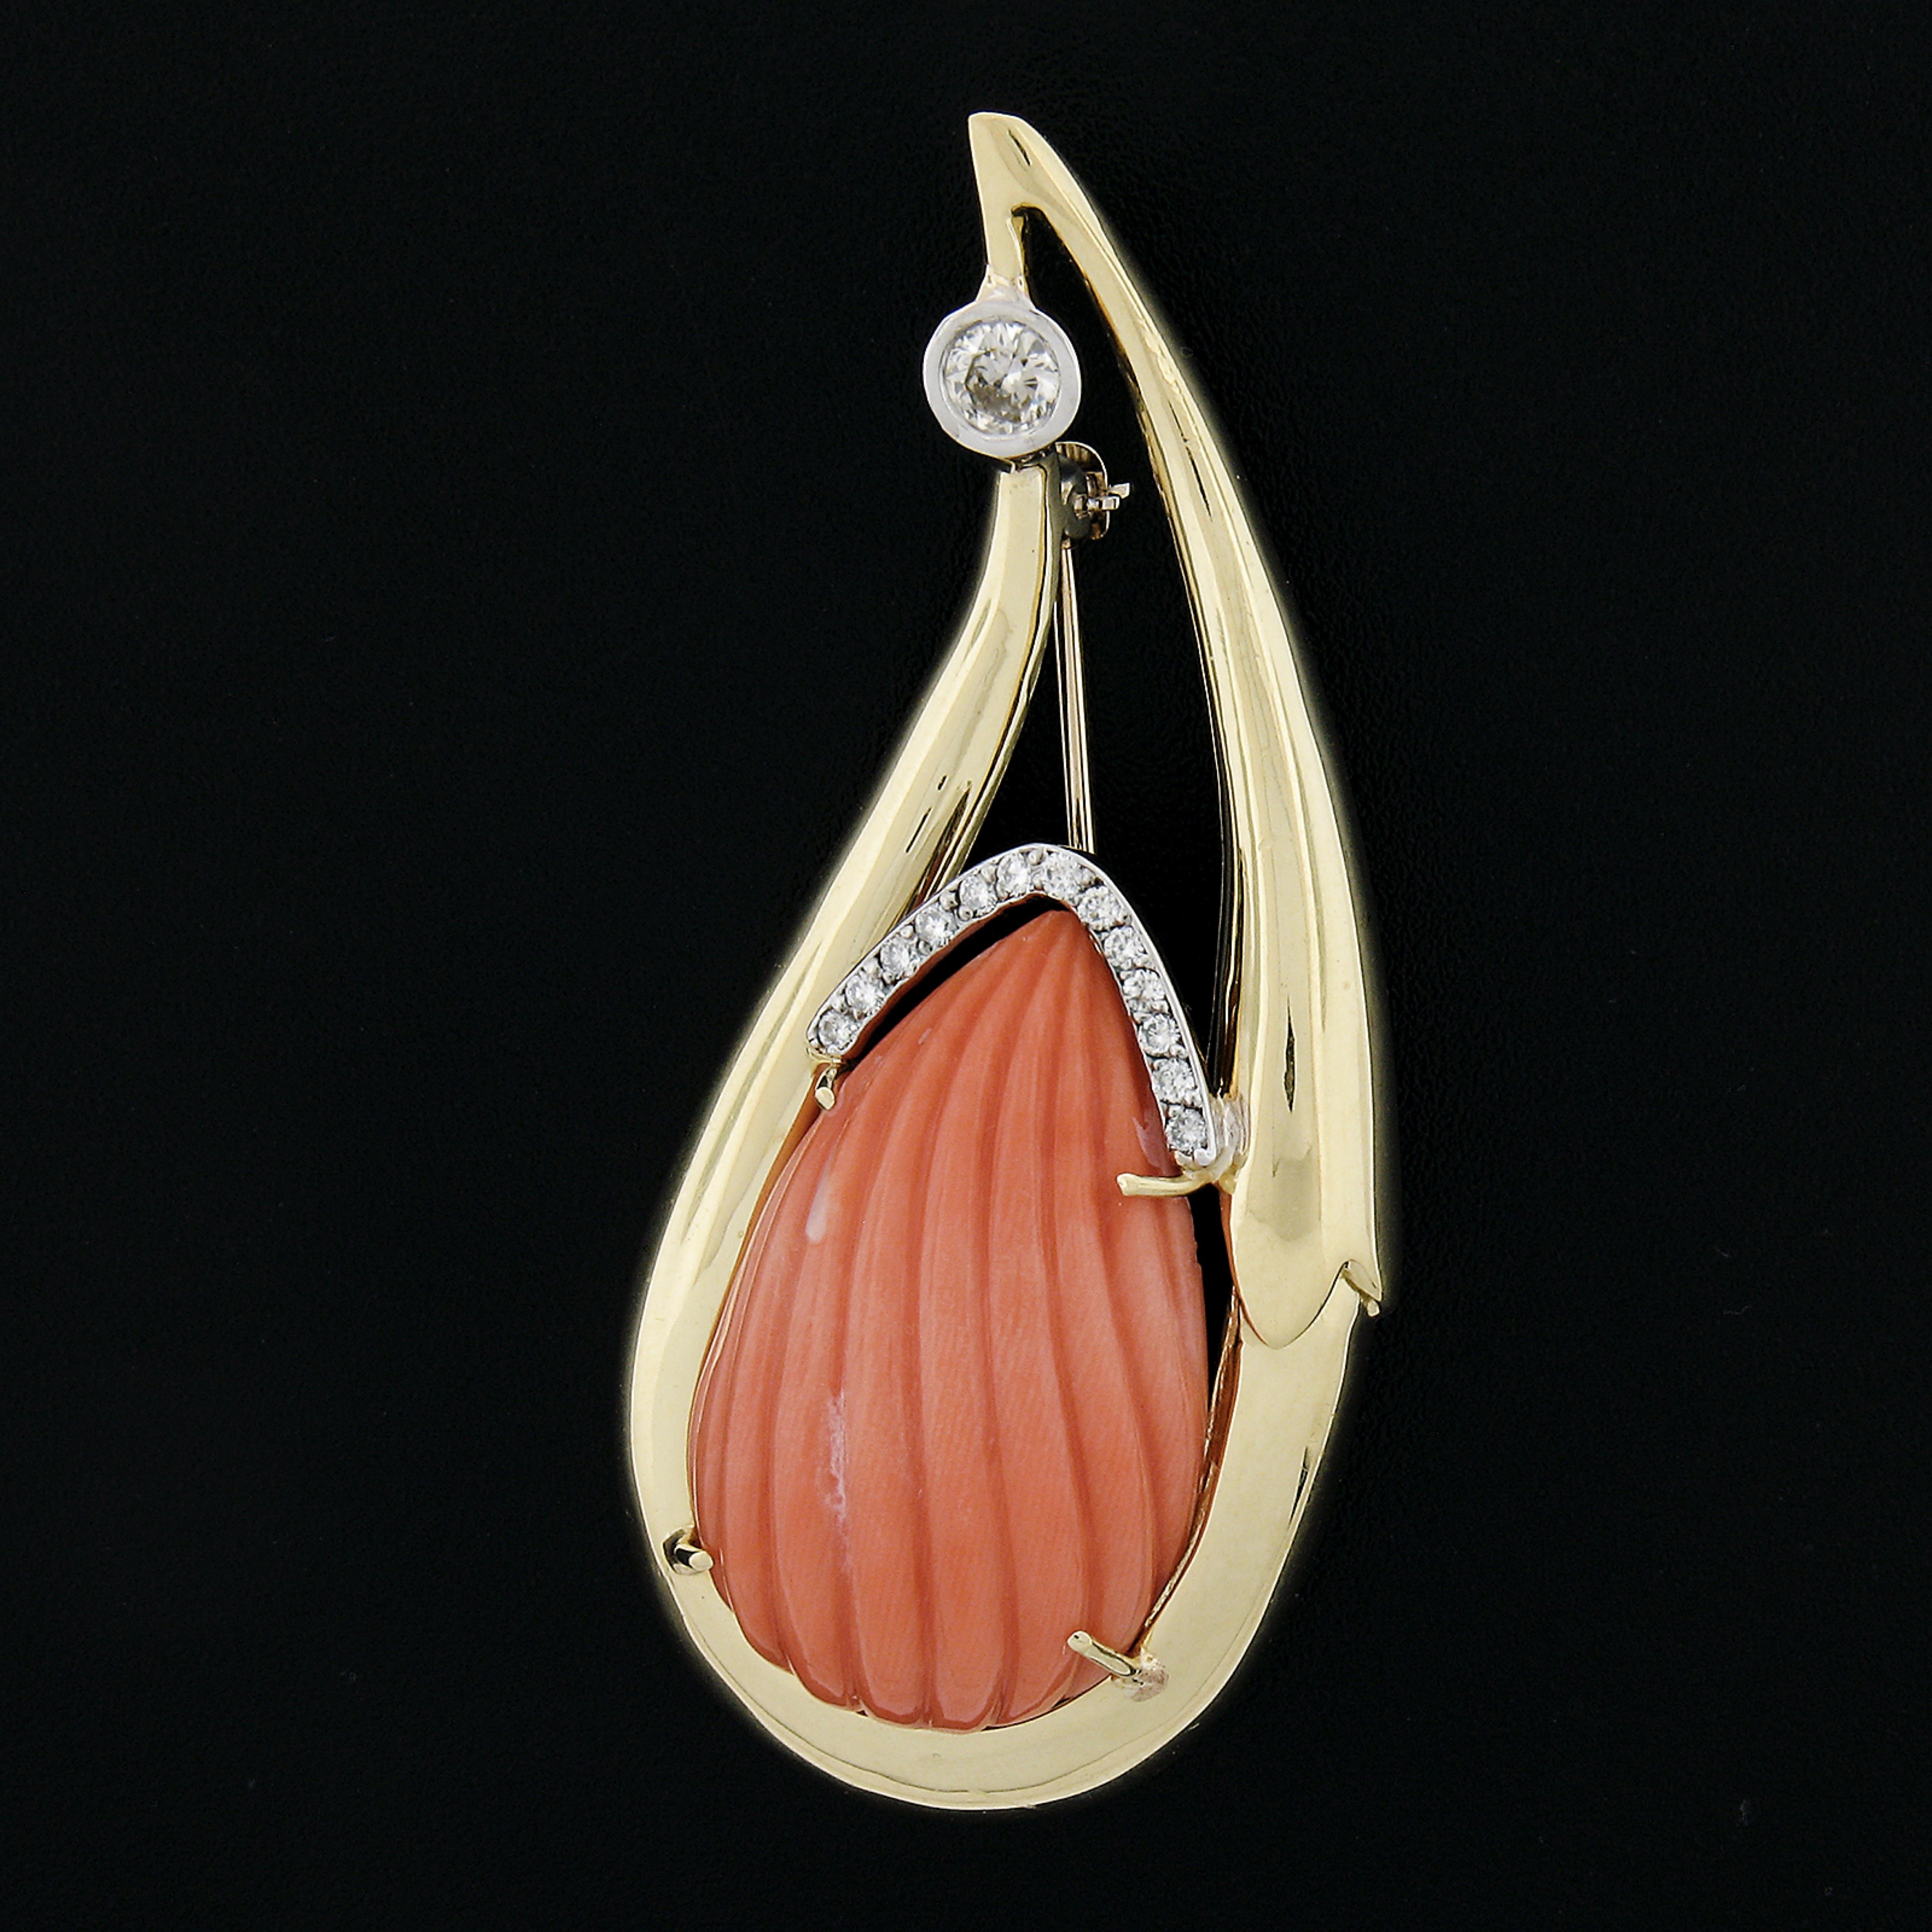 --Stone(s):--
(1) Natural Genuine Carved Corals - Grooved Teardrop Shape - Prong Set - Pink-Orange Color - 29.1x17.8mm (approx.)
(13) Natural Genuine Diamonds - Round Brilliant Cut - Pave Set - 0.15ctw (approx.)
(1) Natural Genuine Diamond - Old